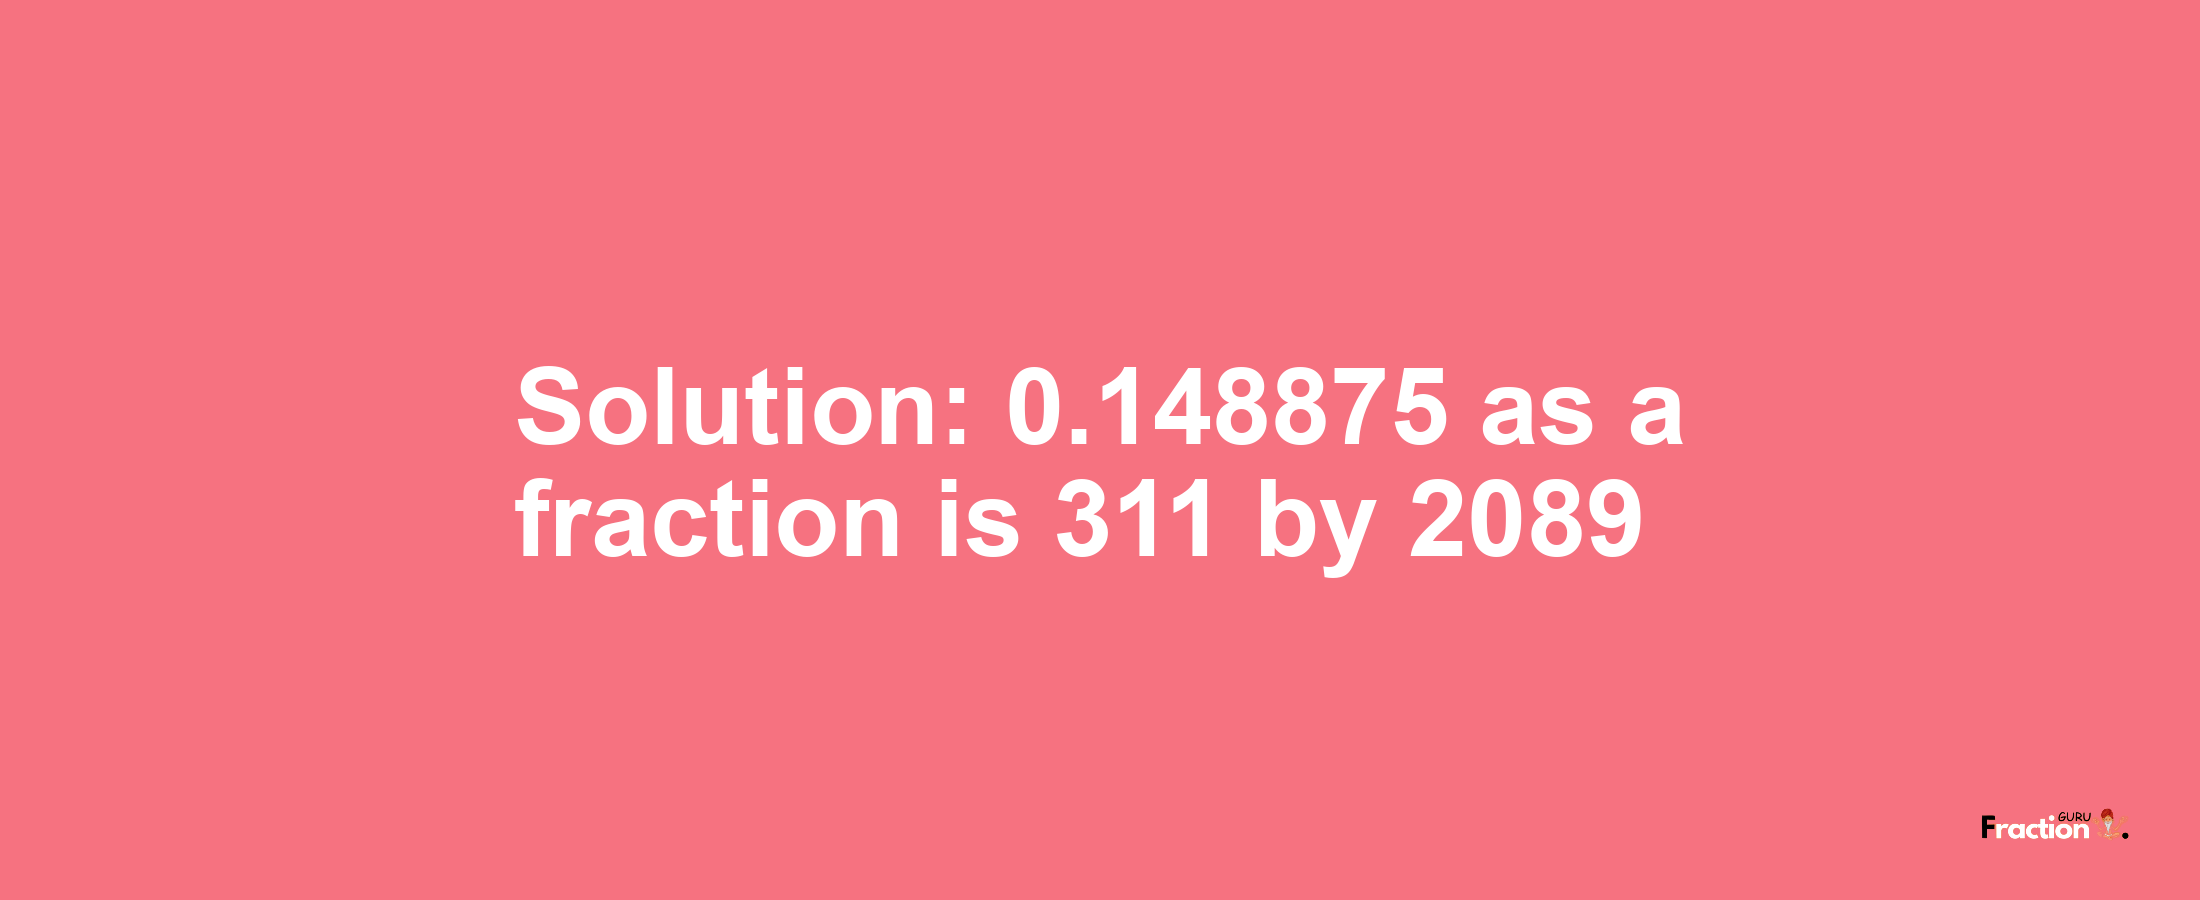 Solution:0.148875 as a fraction is 311/2089